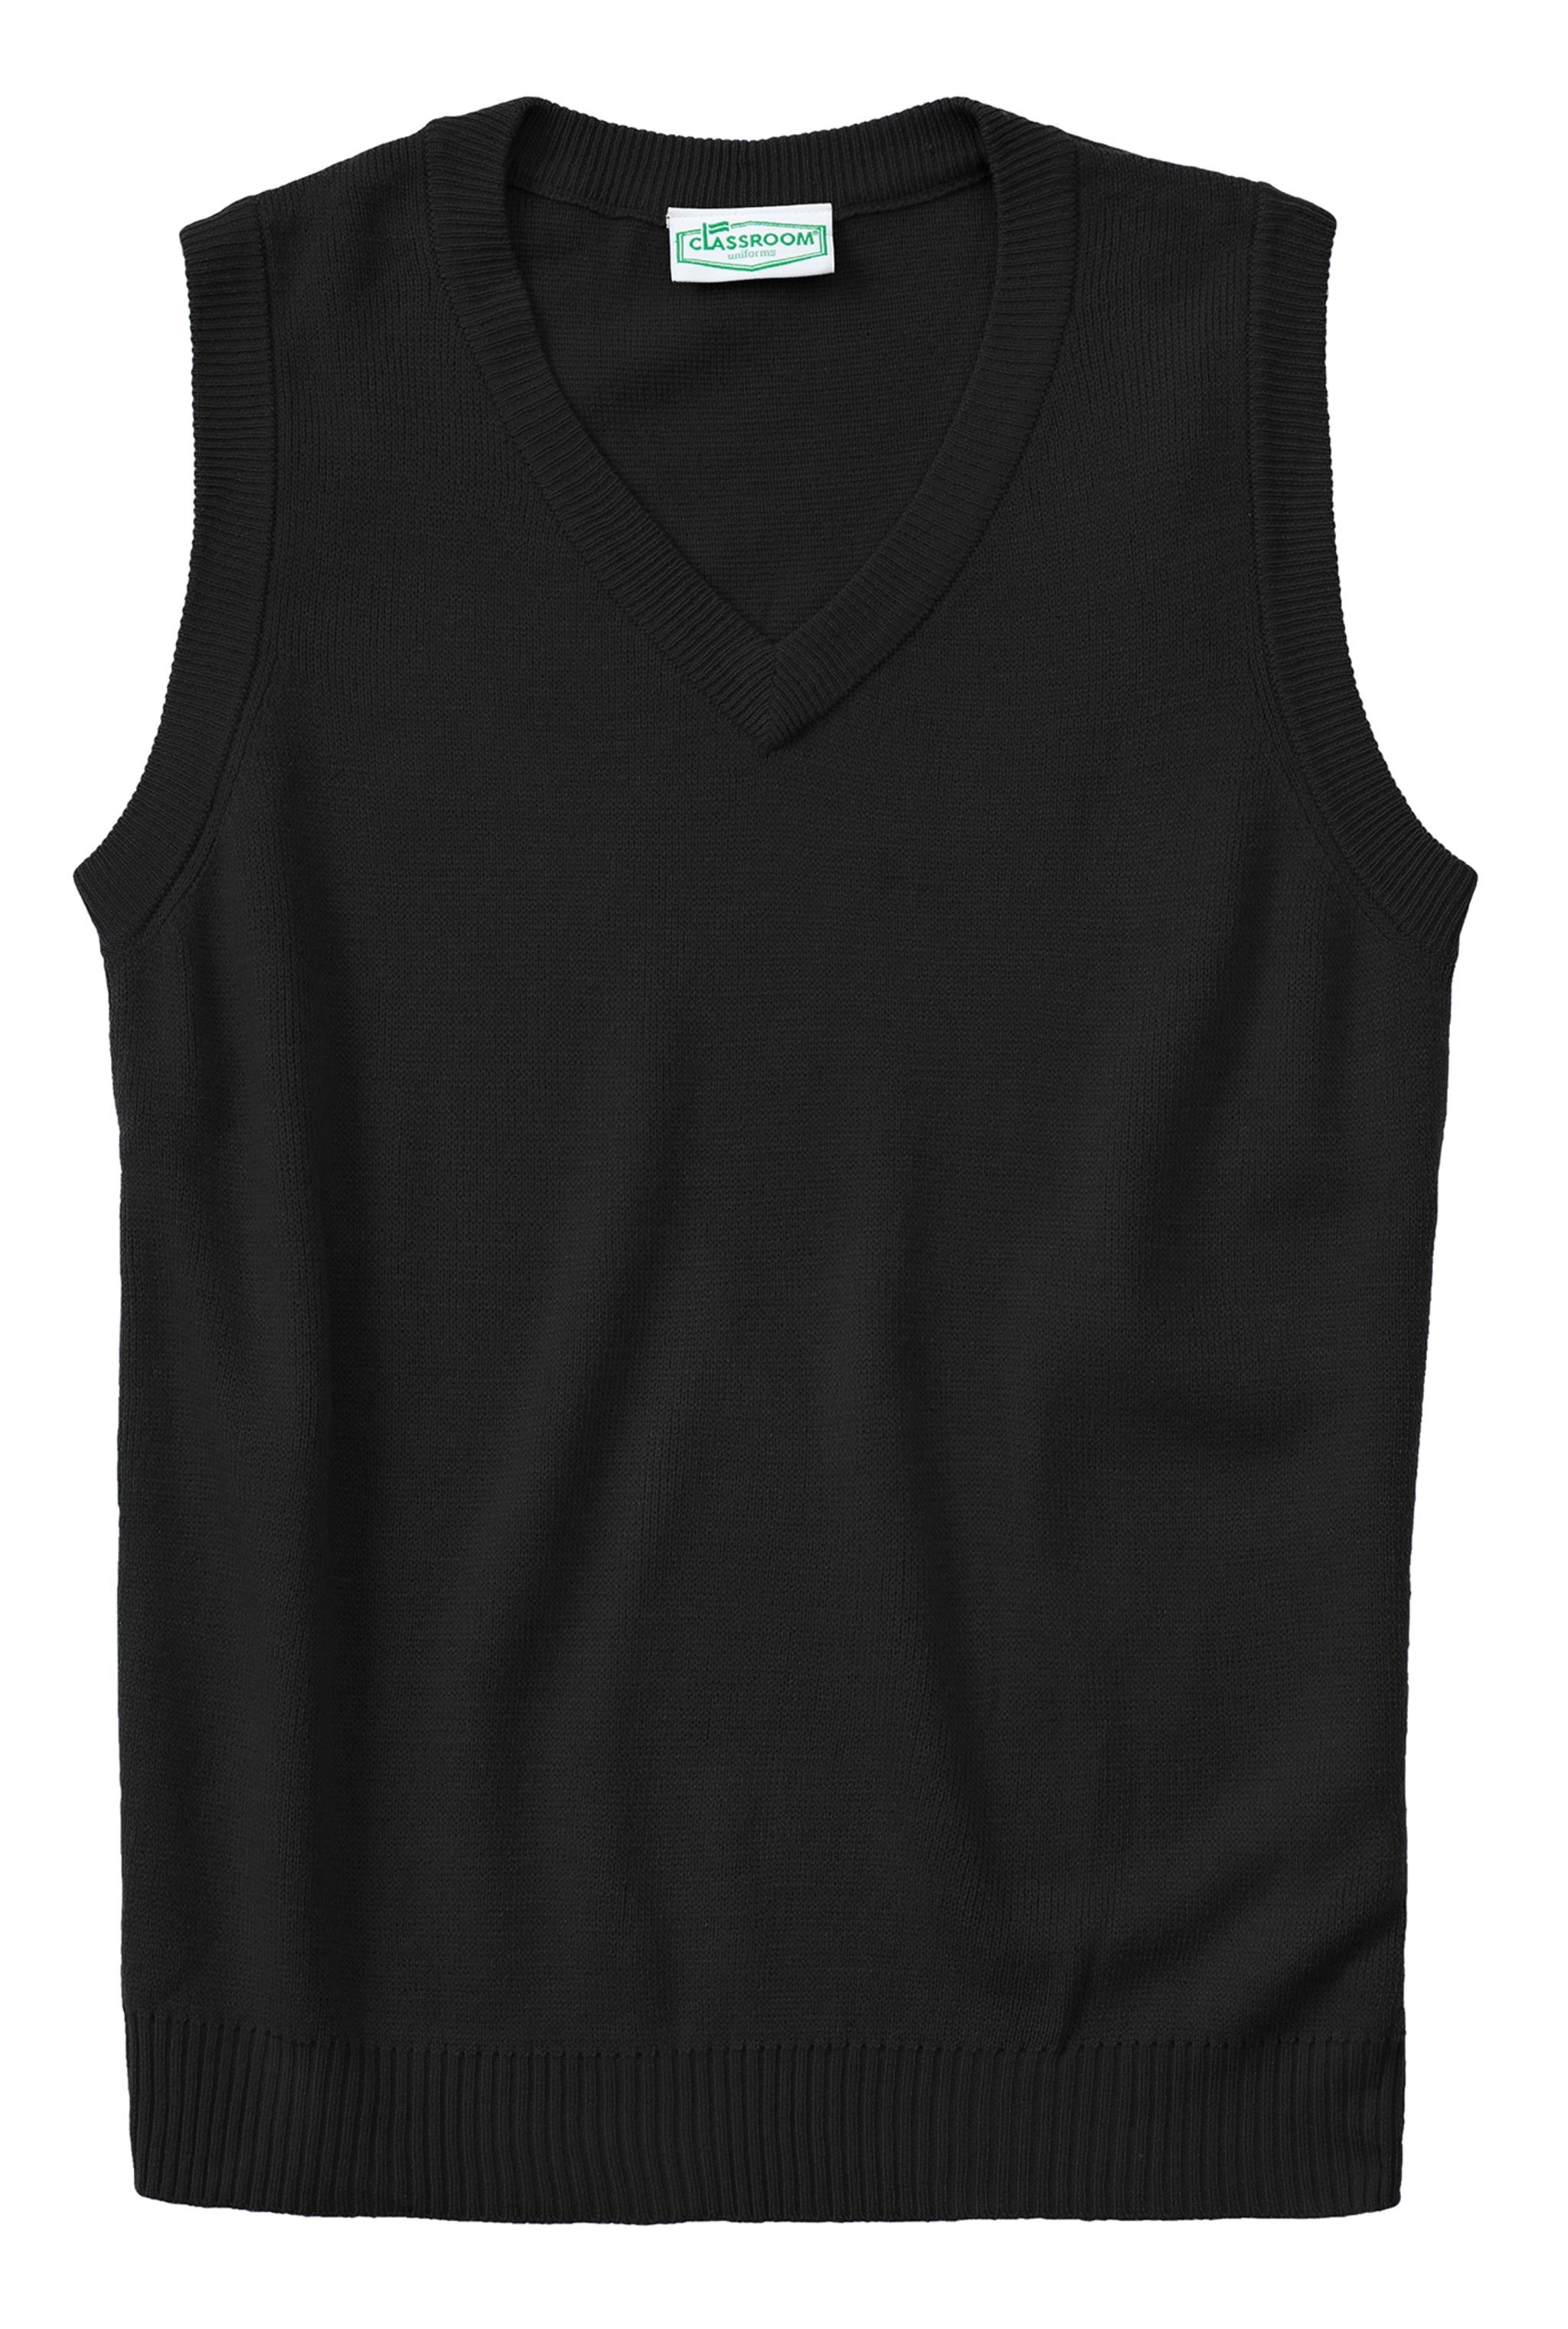 AR - 100% Acrylic Youth sweater vest with Logo